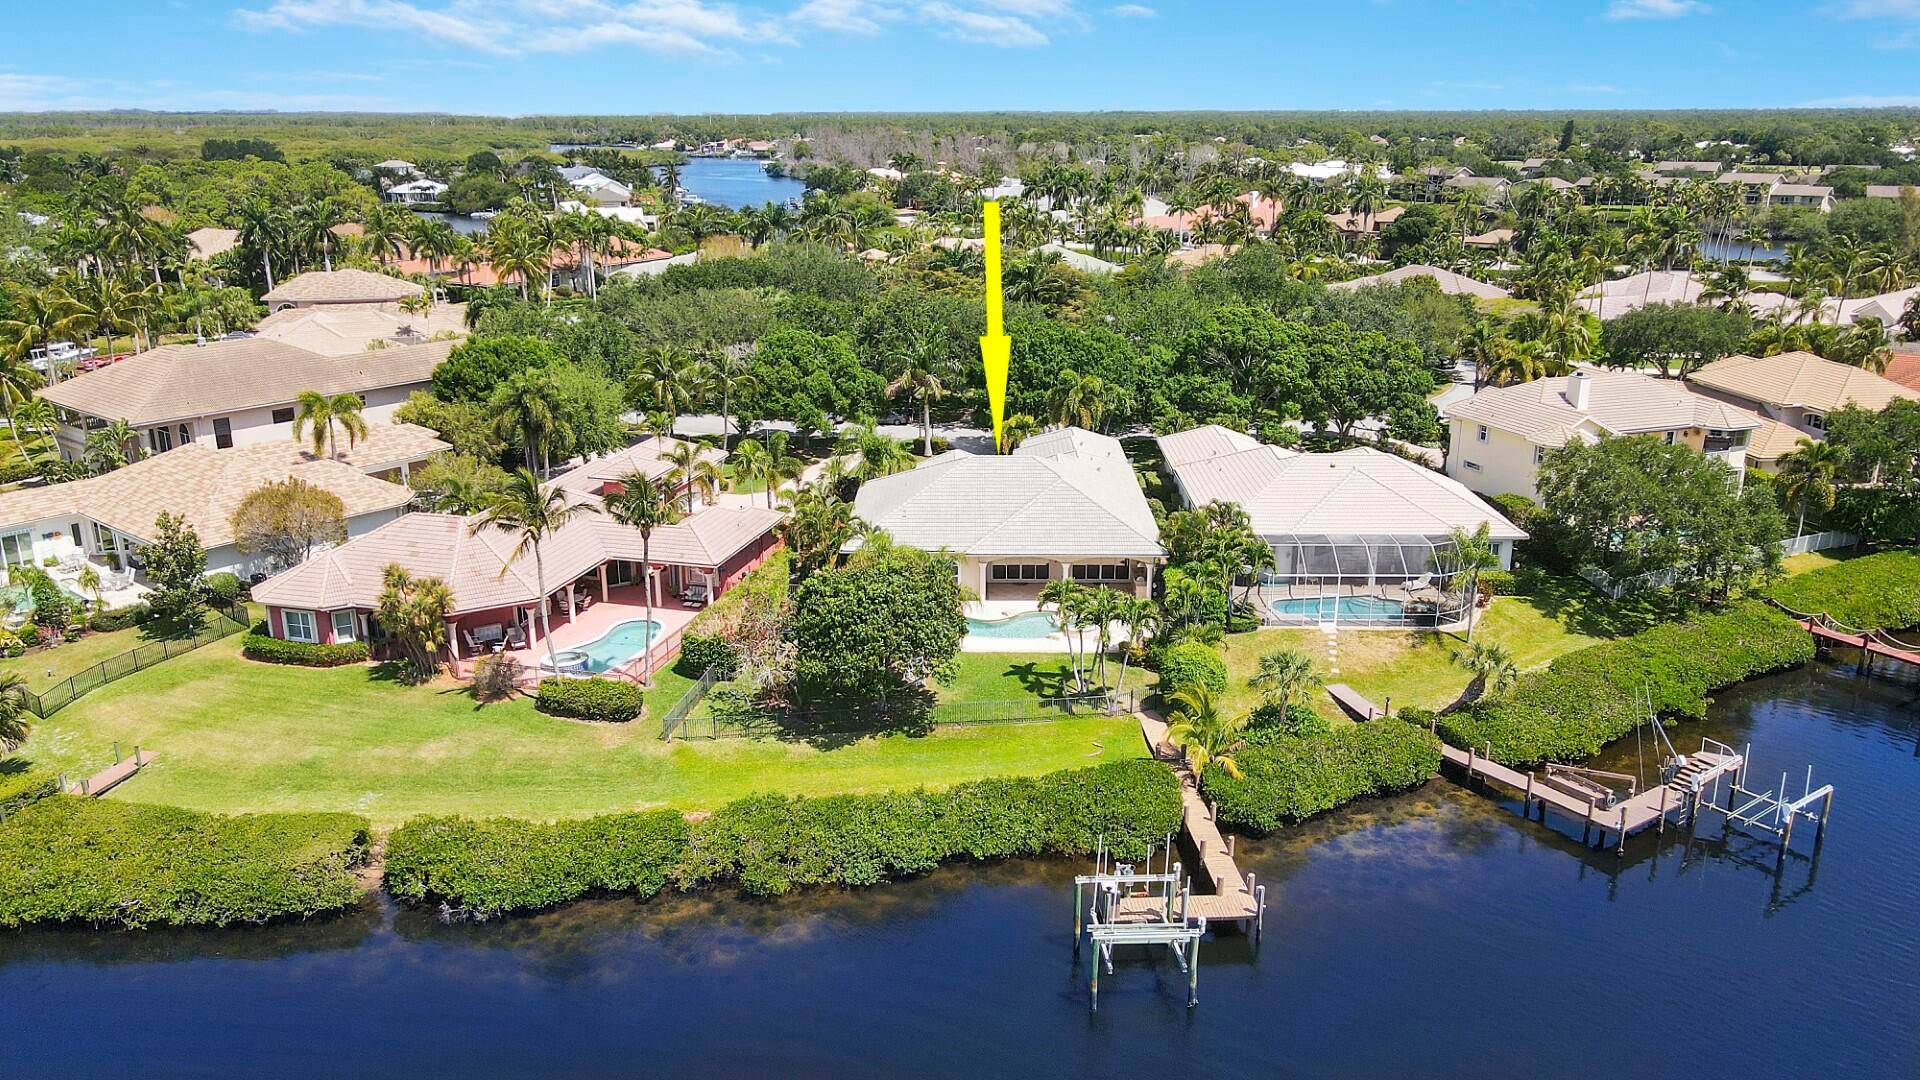 Enjoy the epitome of waterfront living in this spacious Loxahatchee riverfront home.